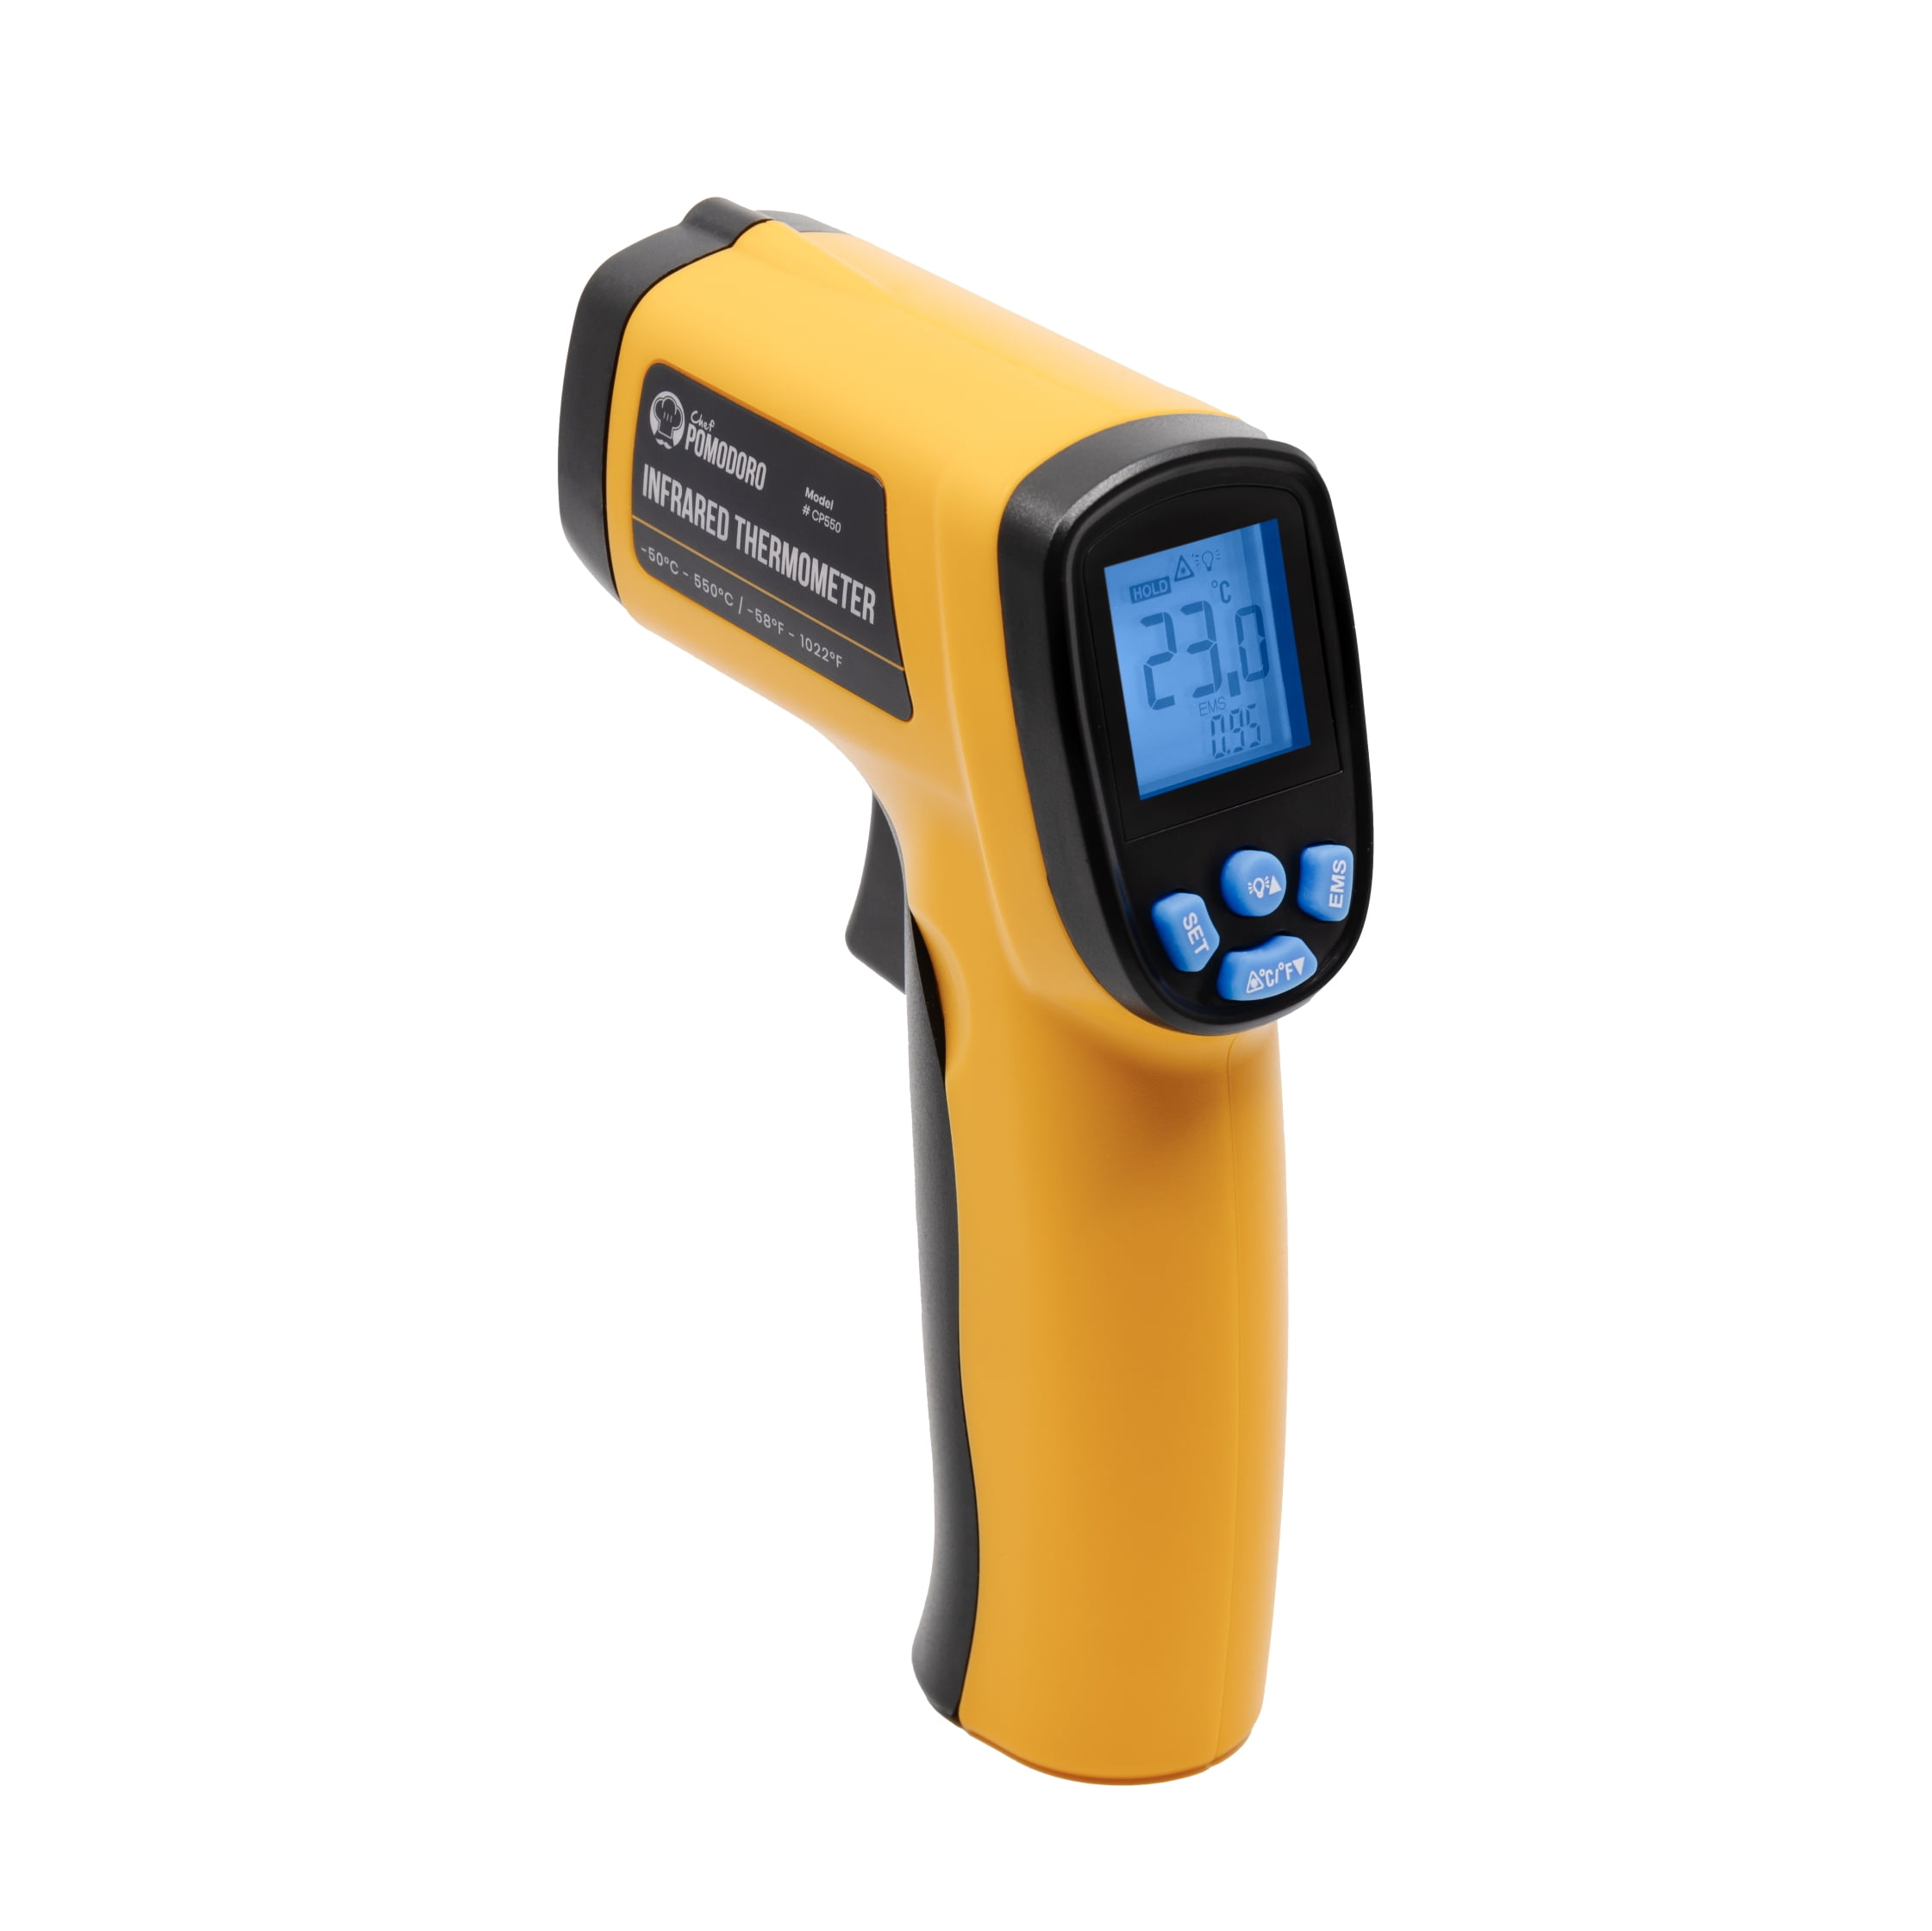 BT-1500 Digital Laser Thermometer Pyrometer 30:1 Laser Thermometer Gun,-58℉  to 2732℉ (-50℃ to 1500℃) High Temp Infrared Thermometer for Industrial